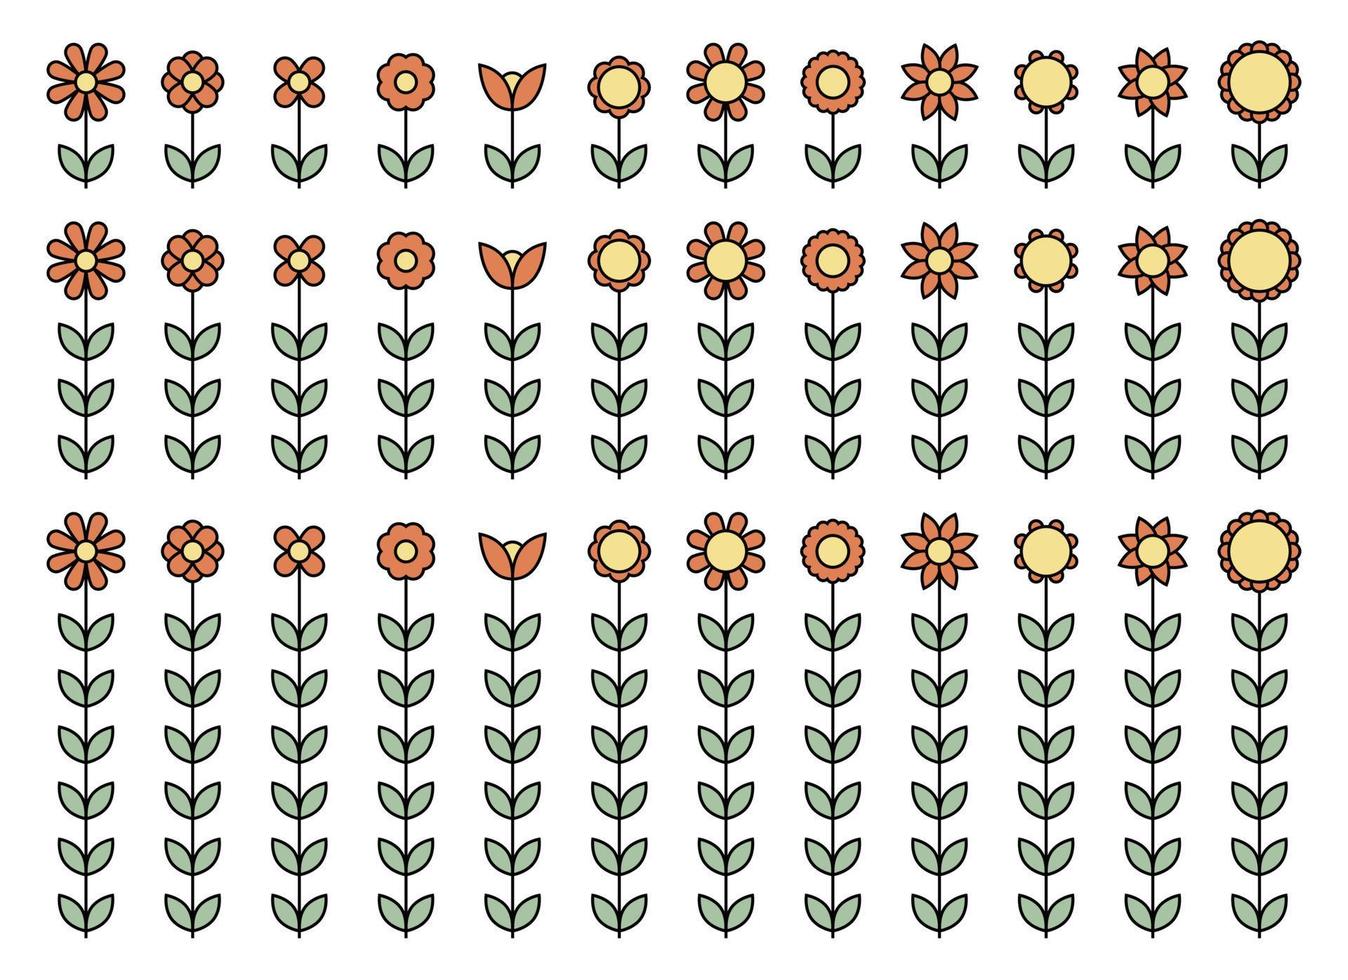 Outline flower with leaves vector set